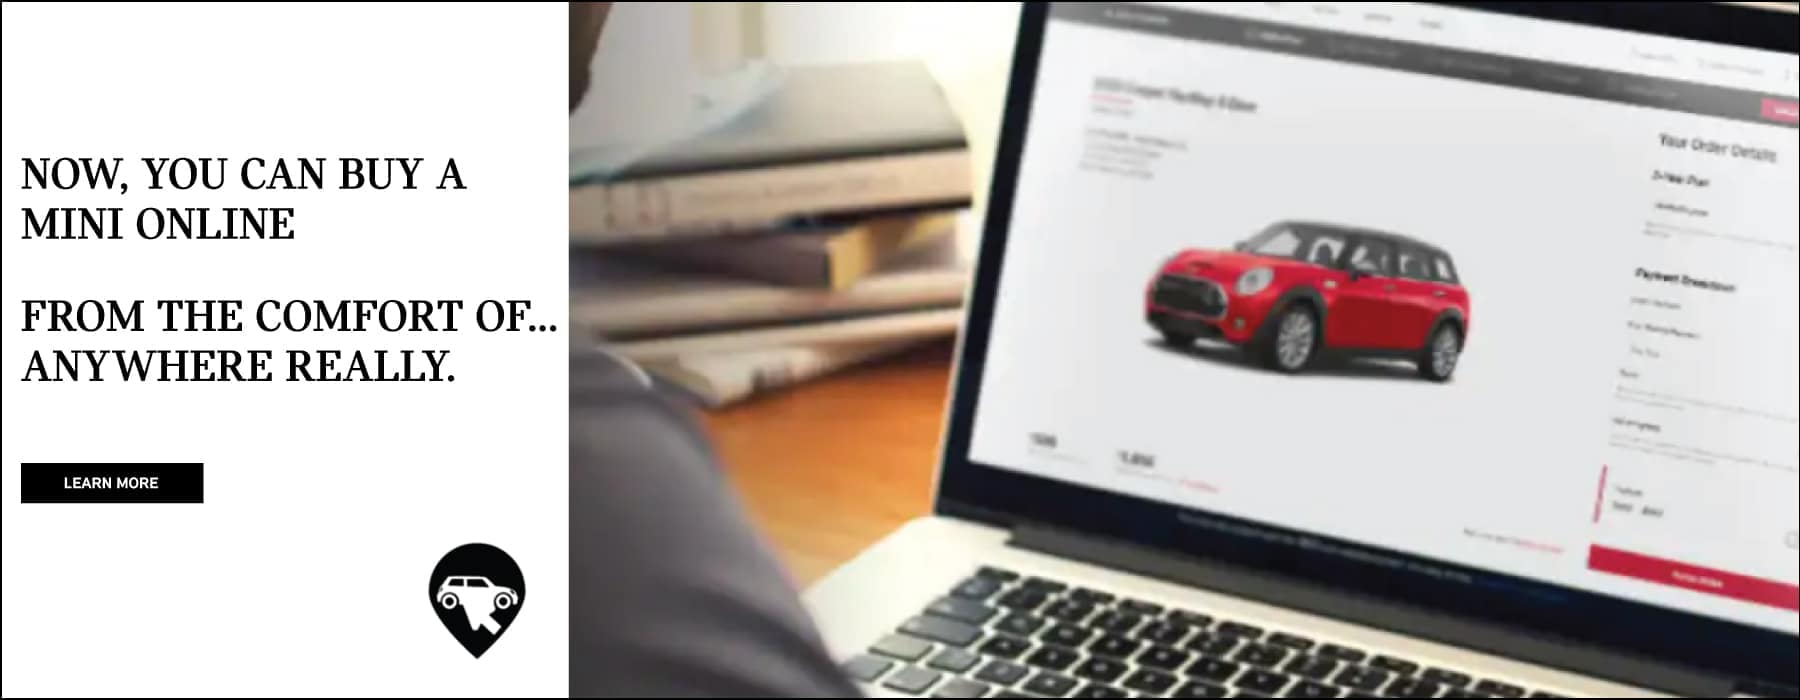 Now you can buy a MINI online, from the comfort of anywhere.